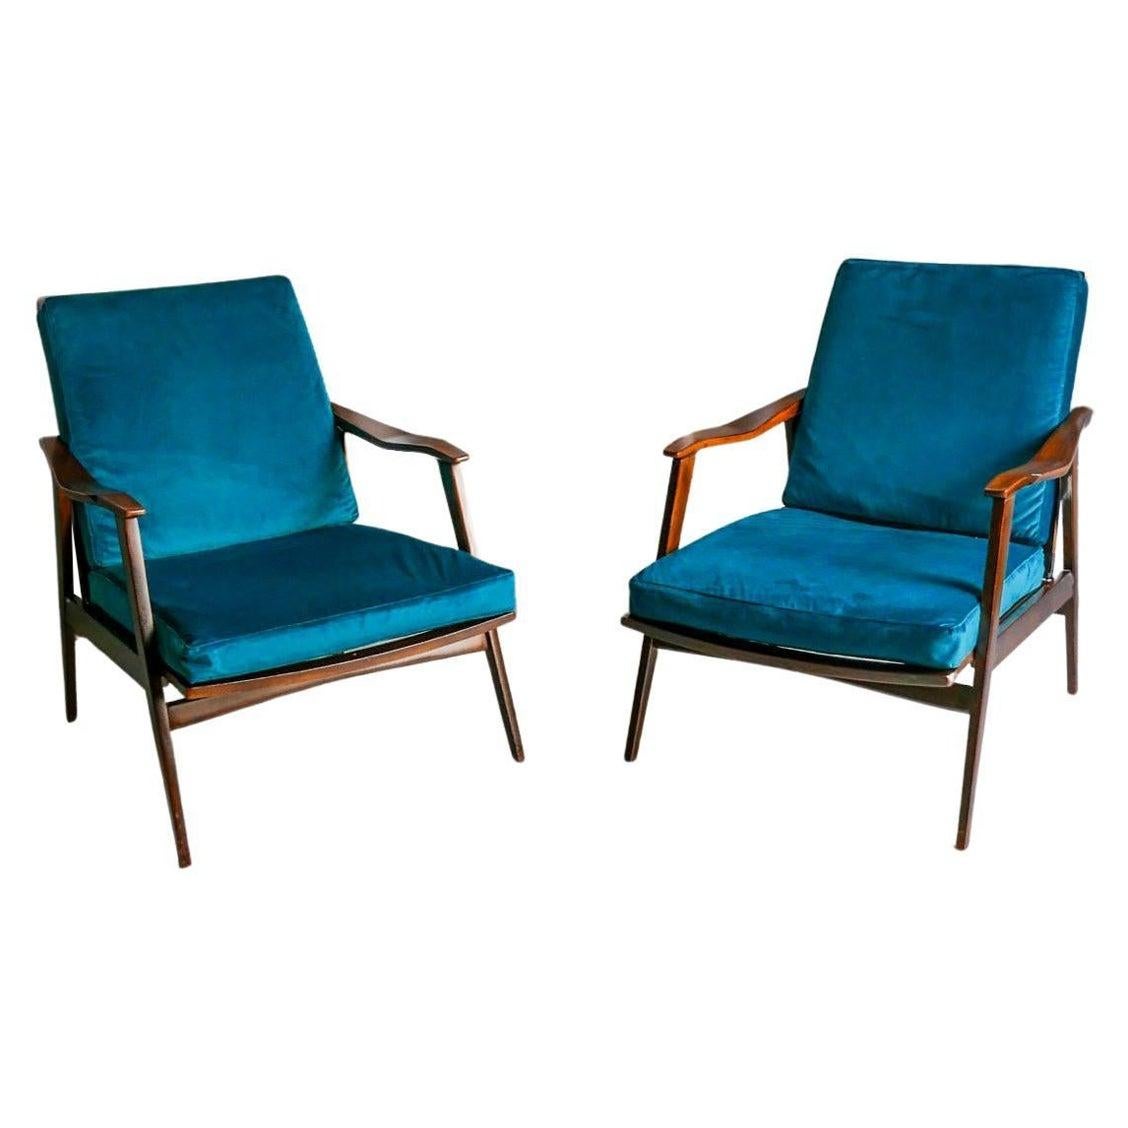 Set of vintage reclining armchairs, with teak frame and petrol blue cushions